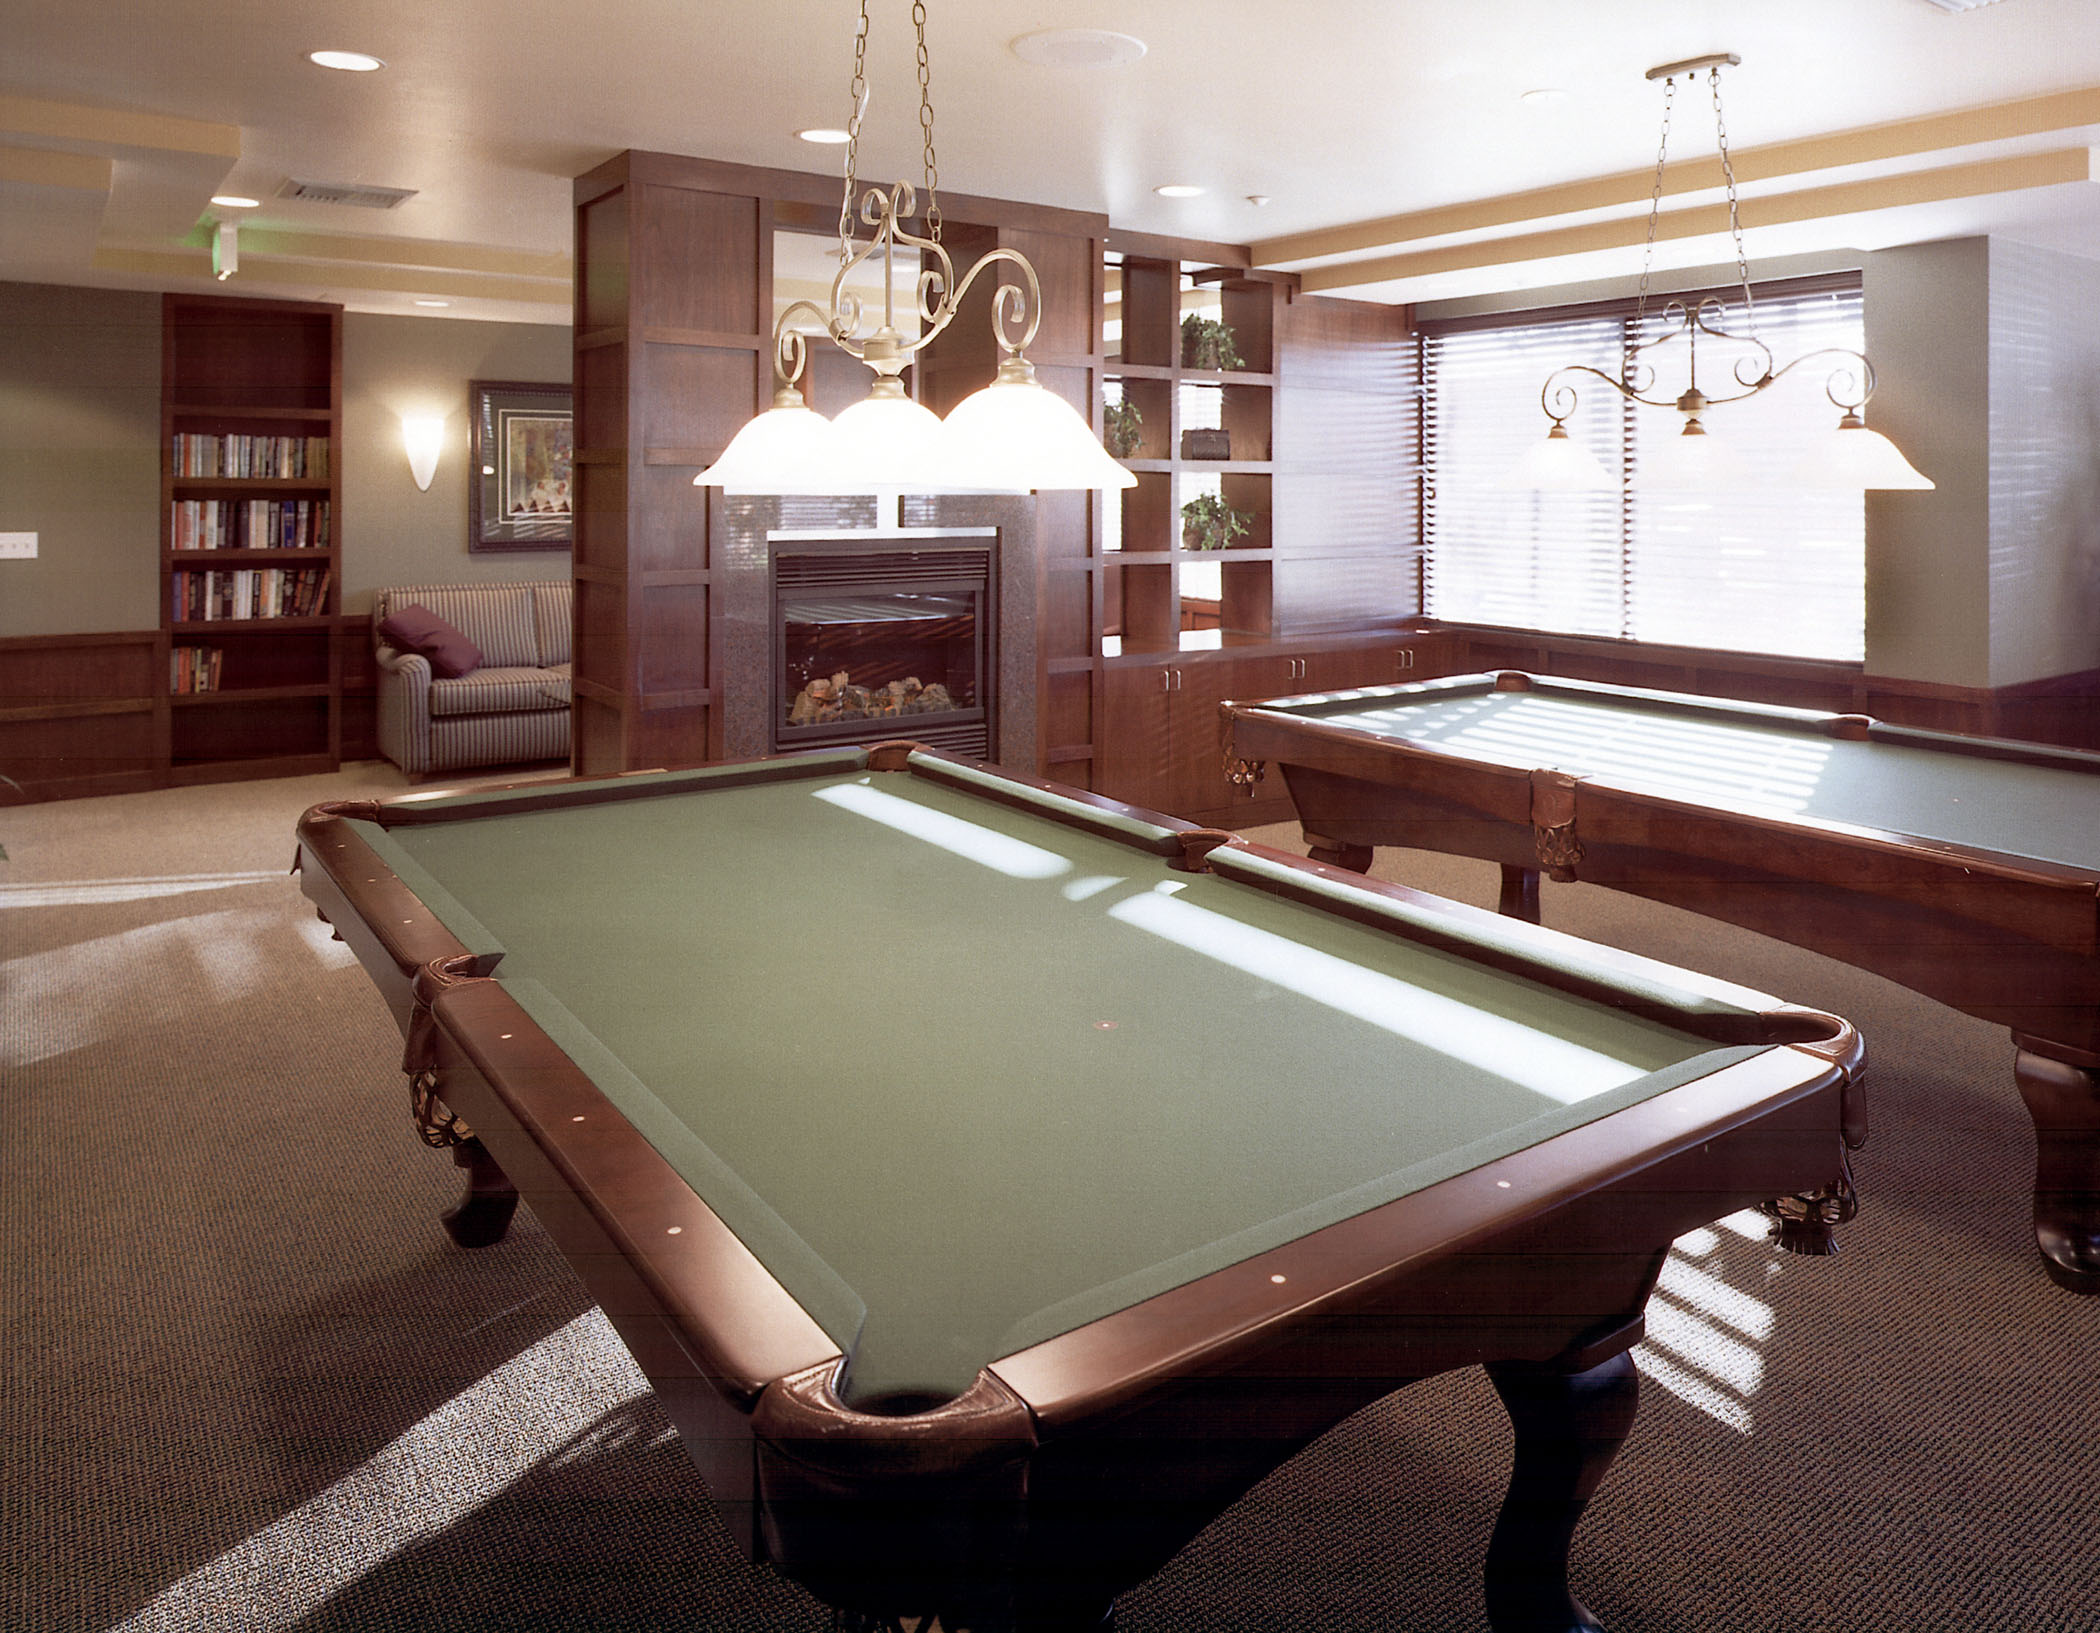 View of the billards room equipped with two pool tables